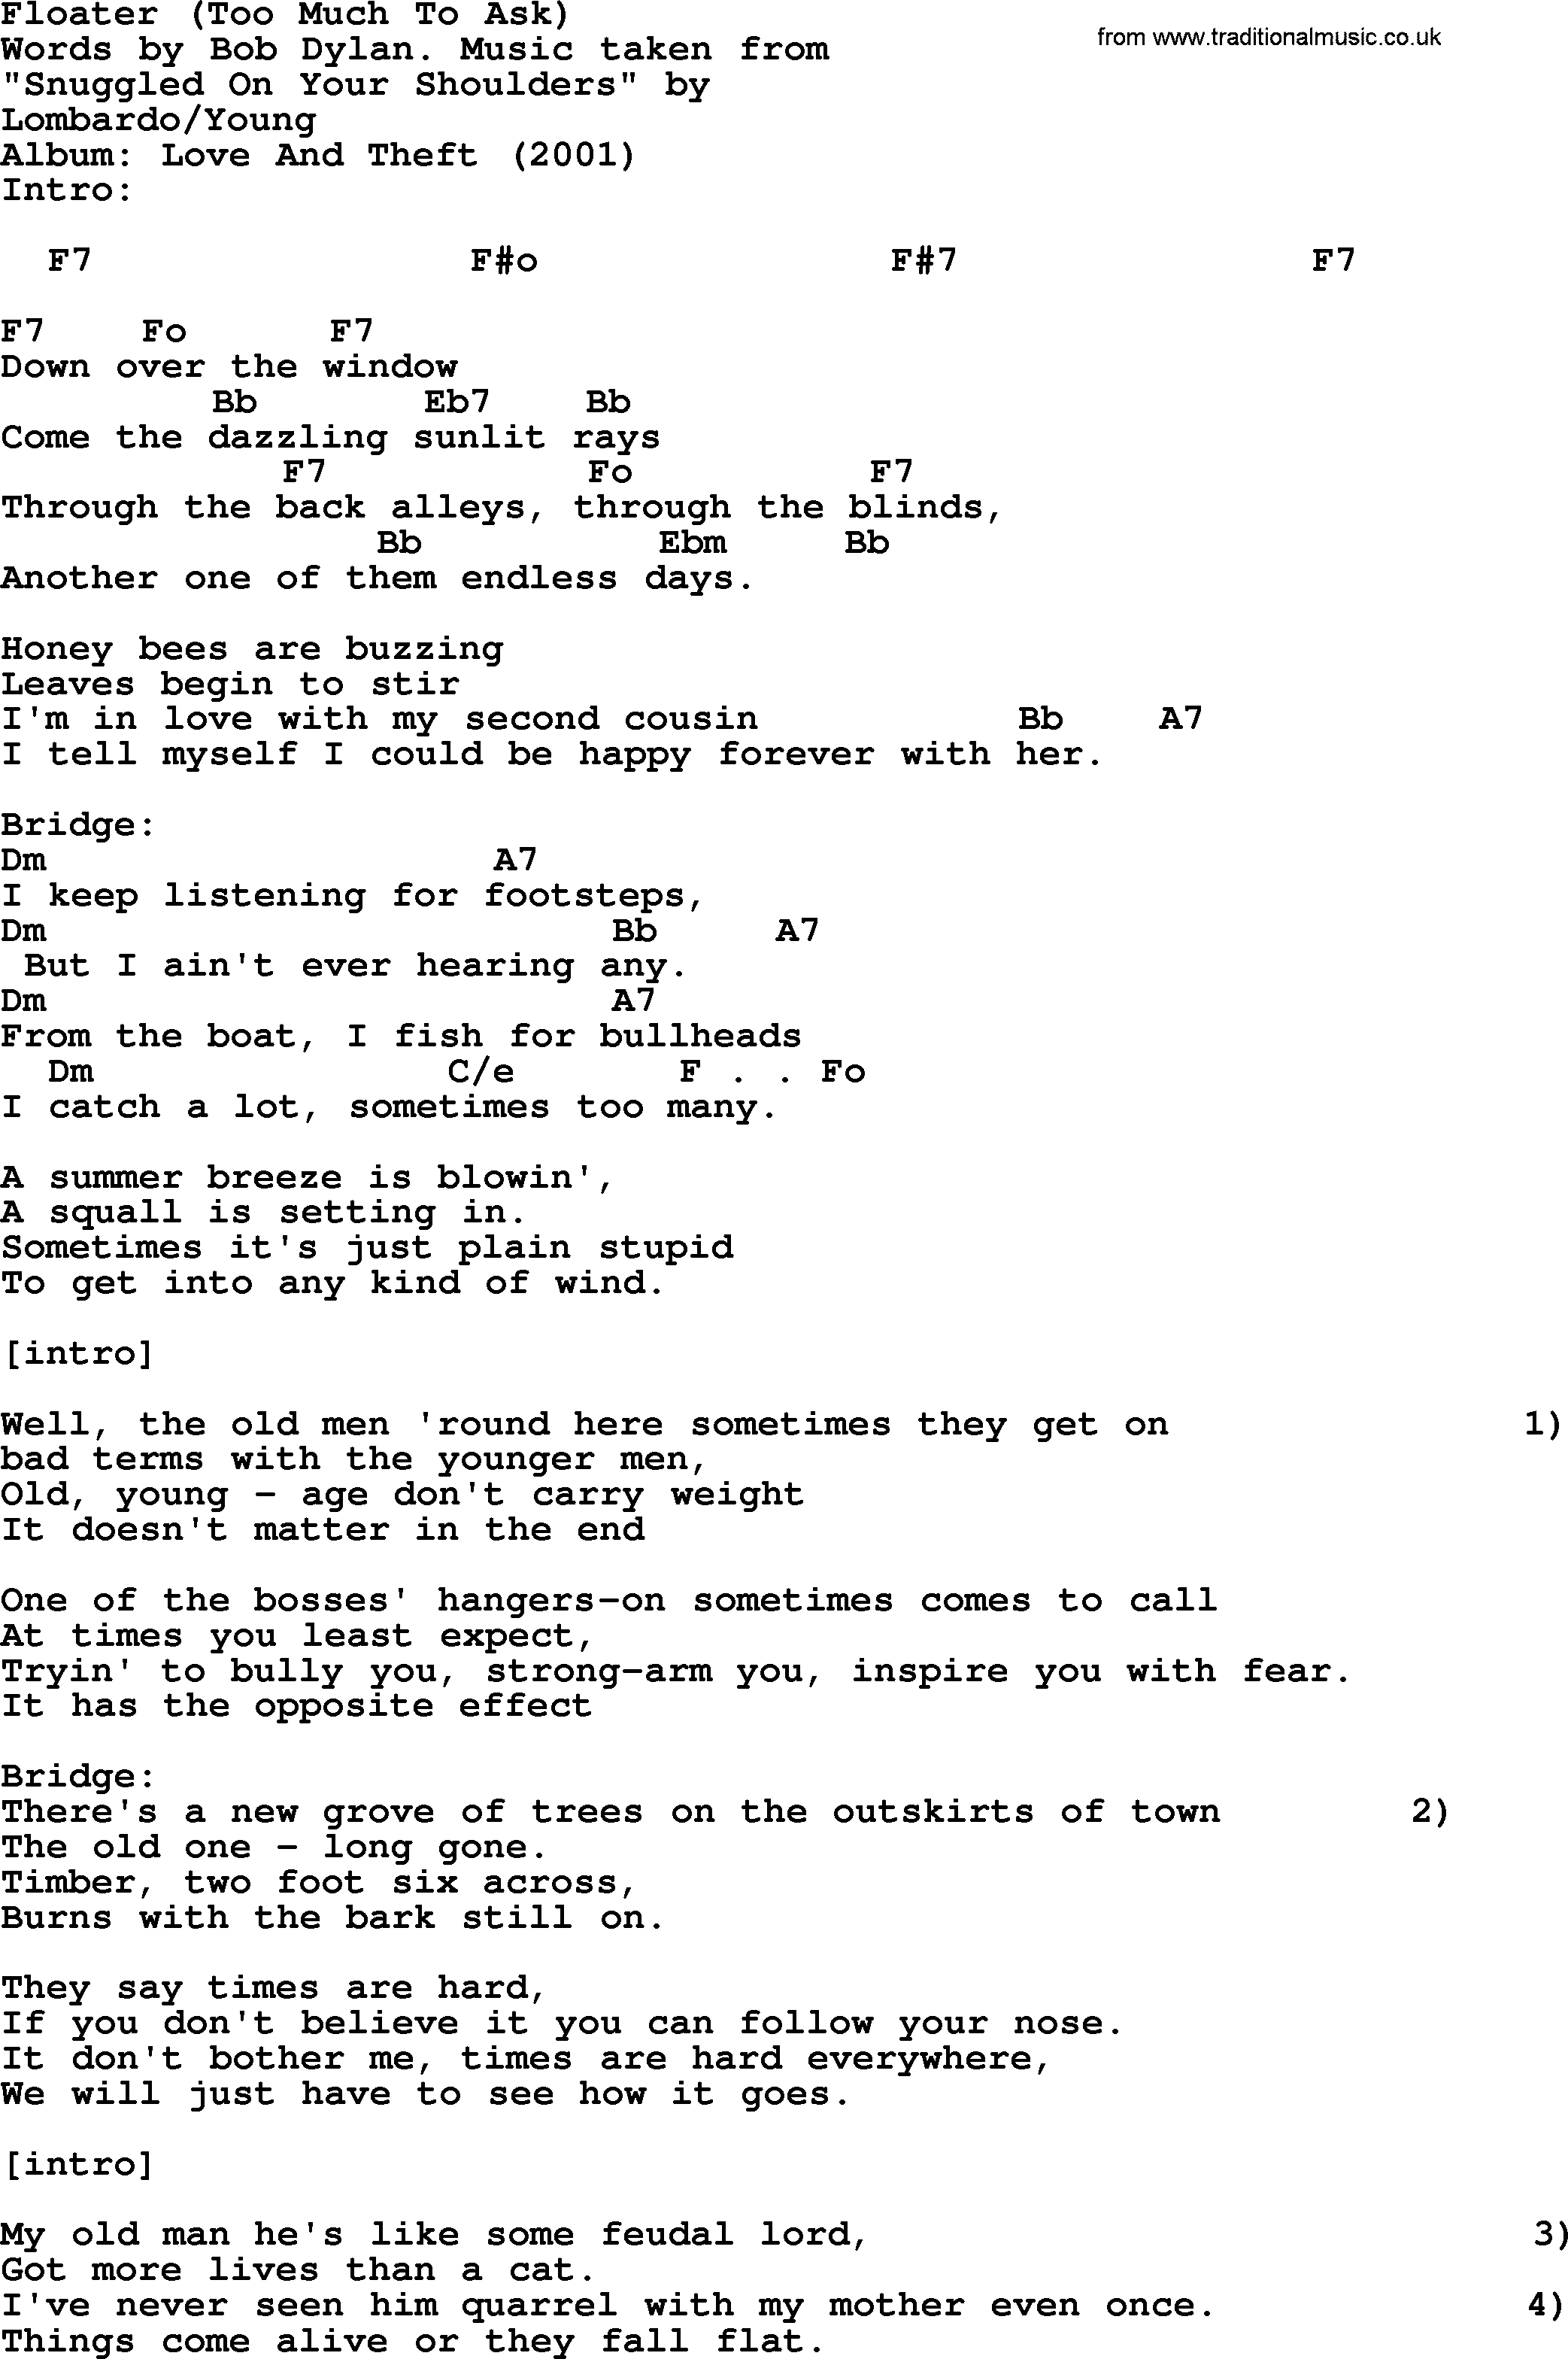 Bob Dylan song, lyrics with chords - Floater (Too Much To Ask)